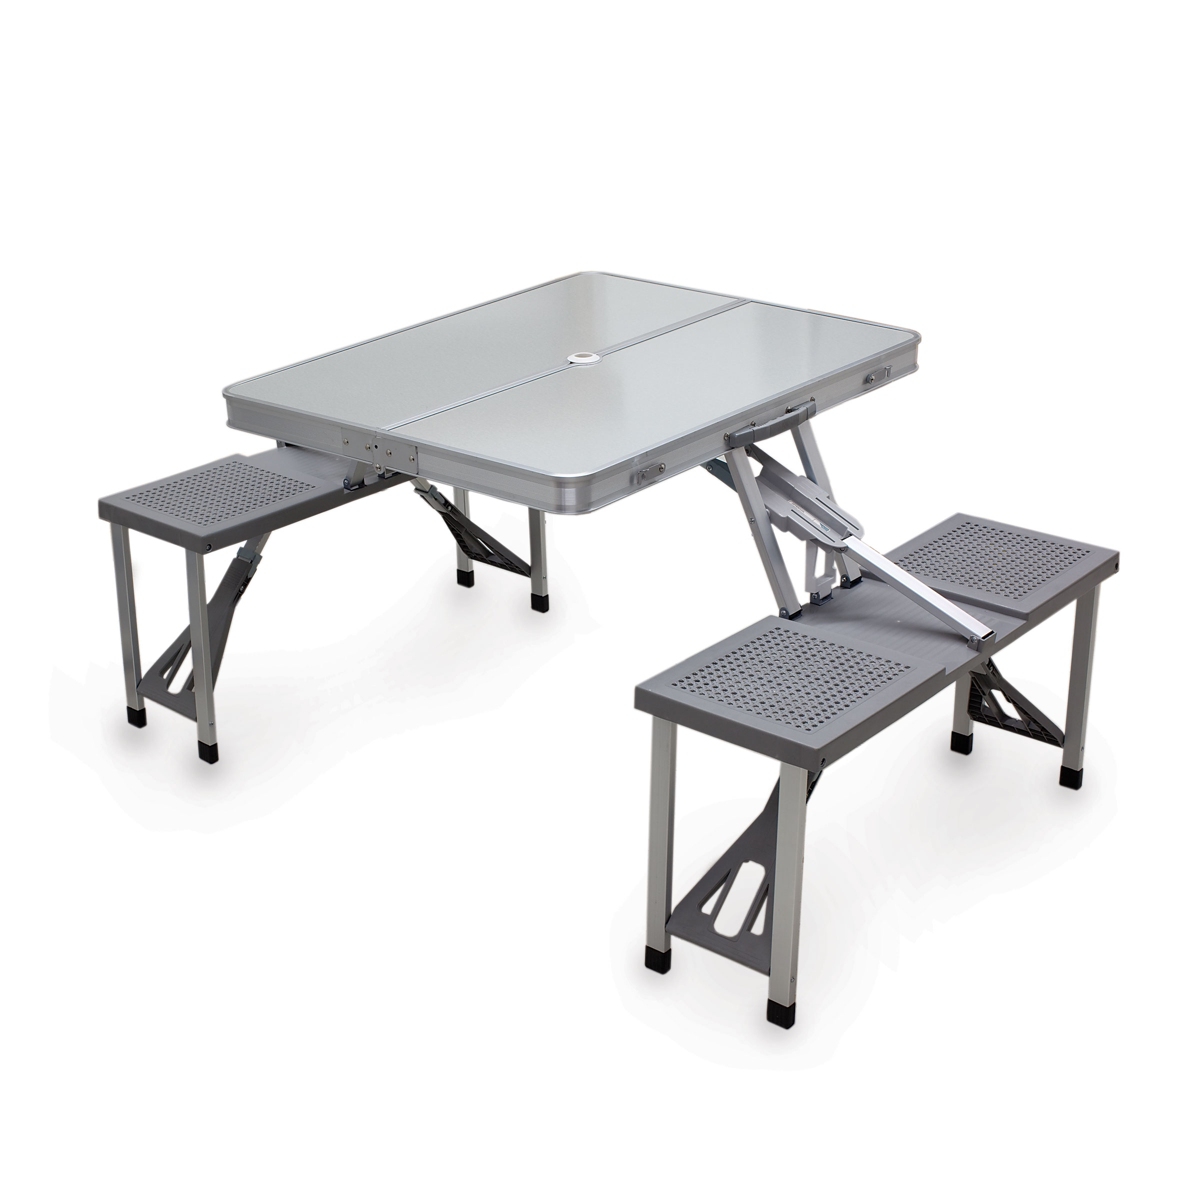 by Picnic Time Aluminum Portable Picnic Table with Seats - Silver